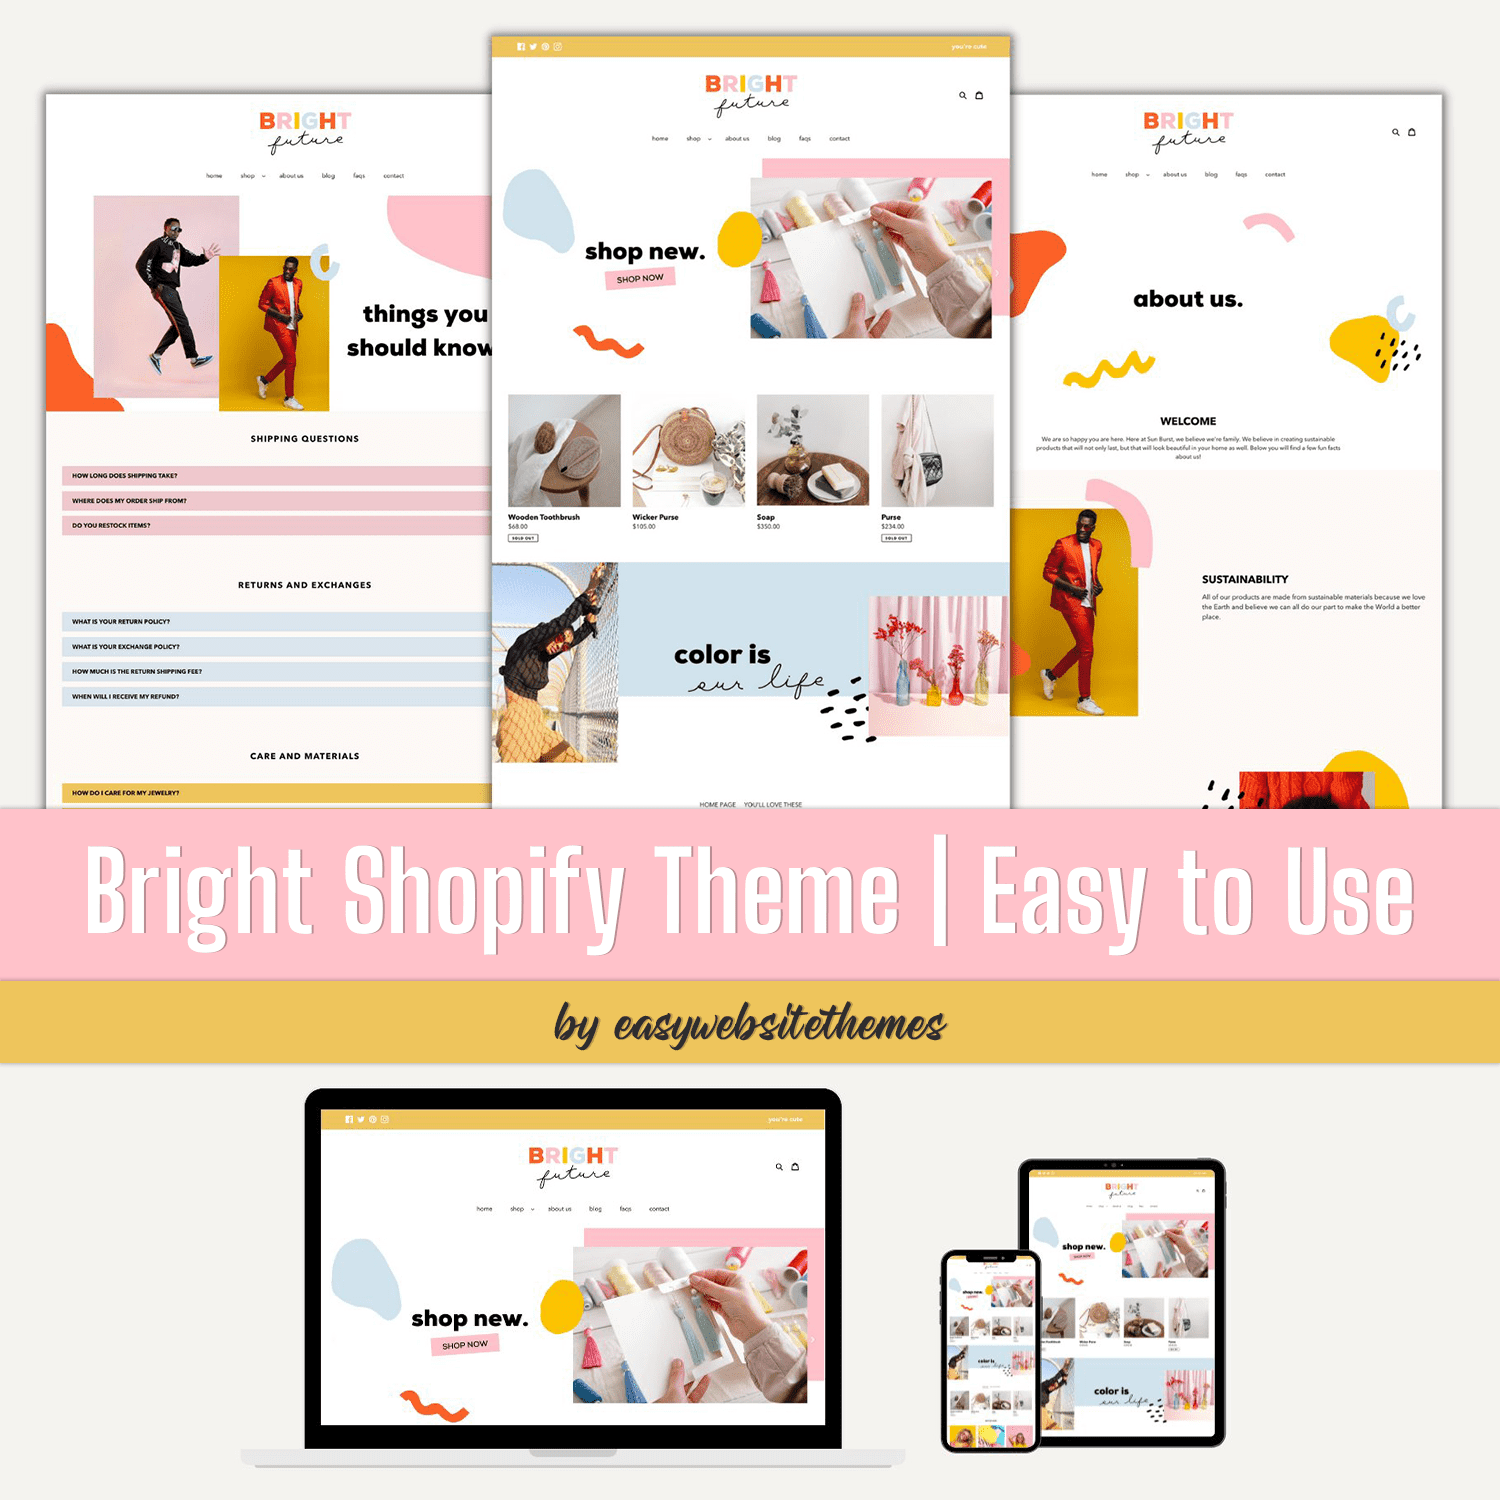 Bright Shopify Theme | Easy to Use.